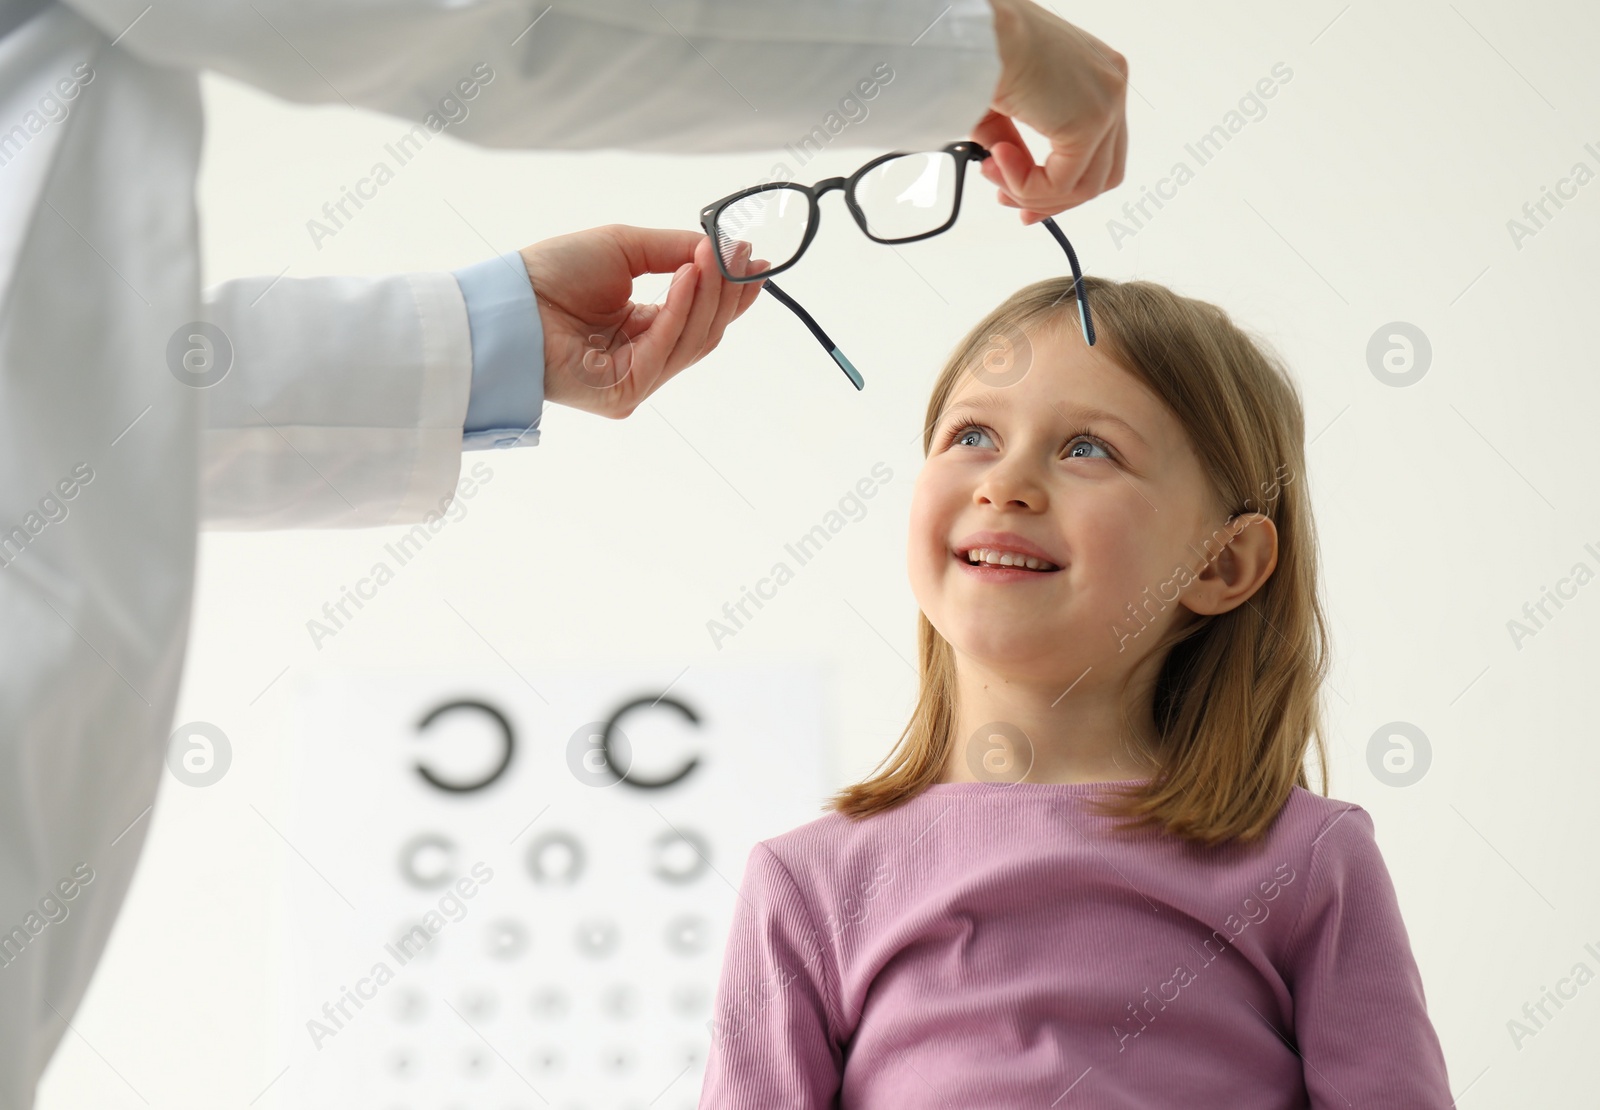 Photo of Vision testing. Ophthalmologist giving glasses to little girl indoors, low angle view